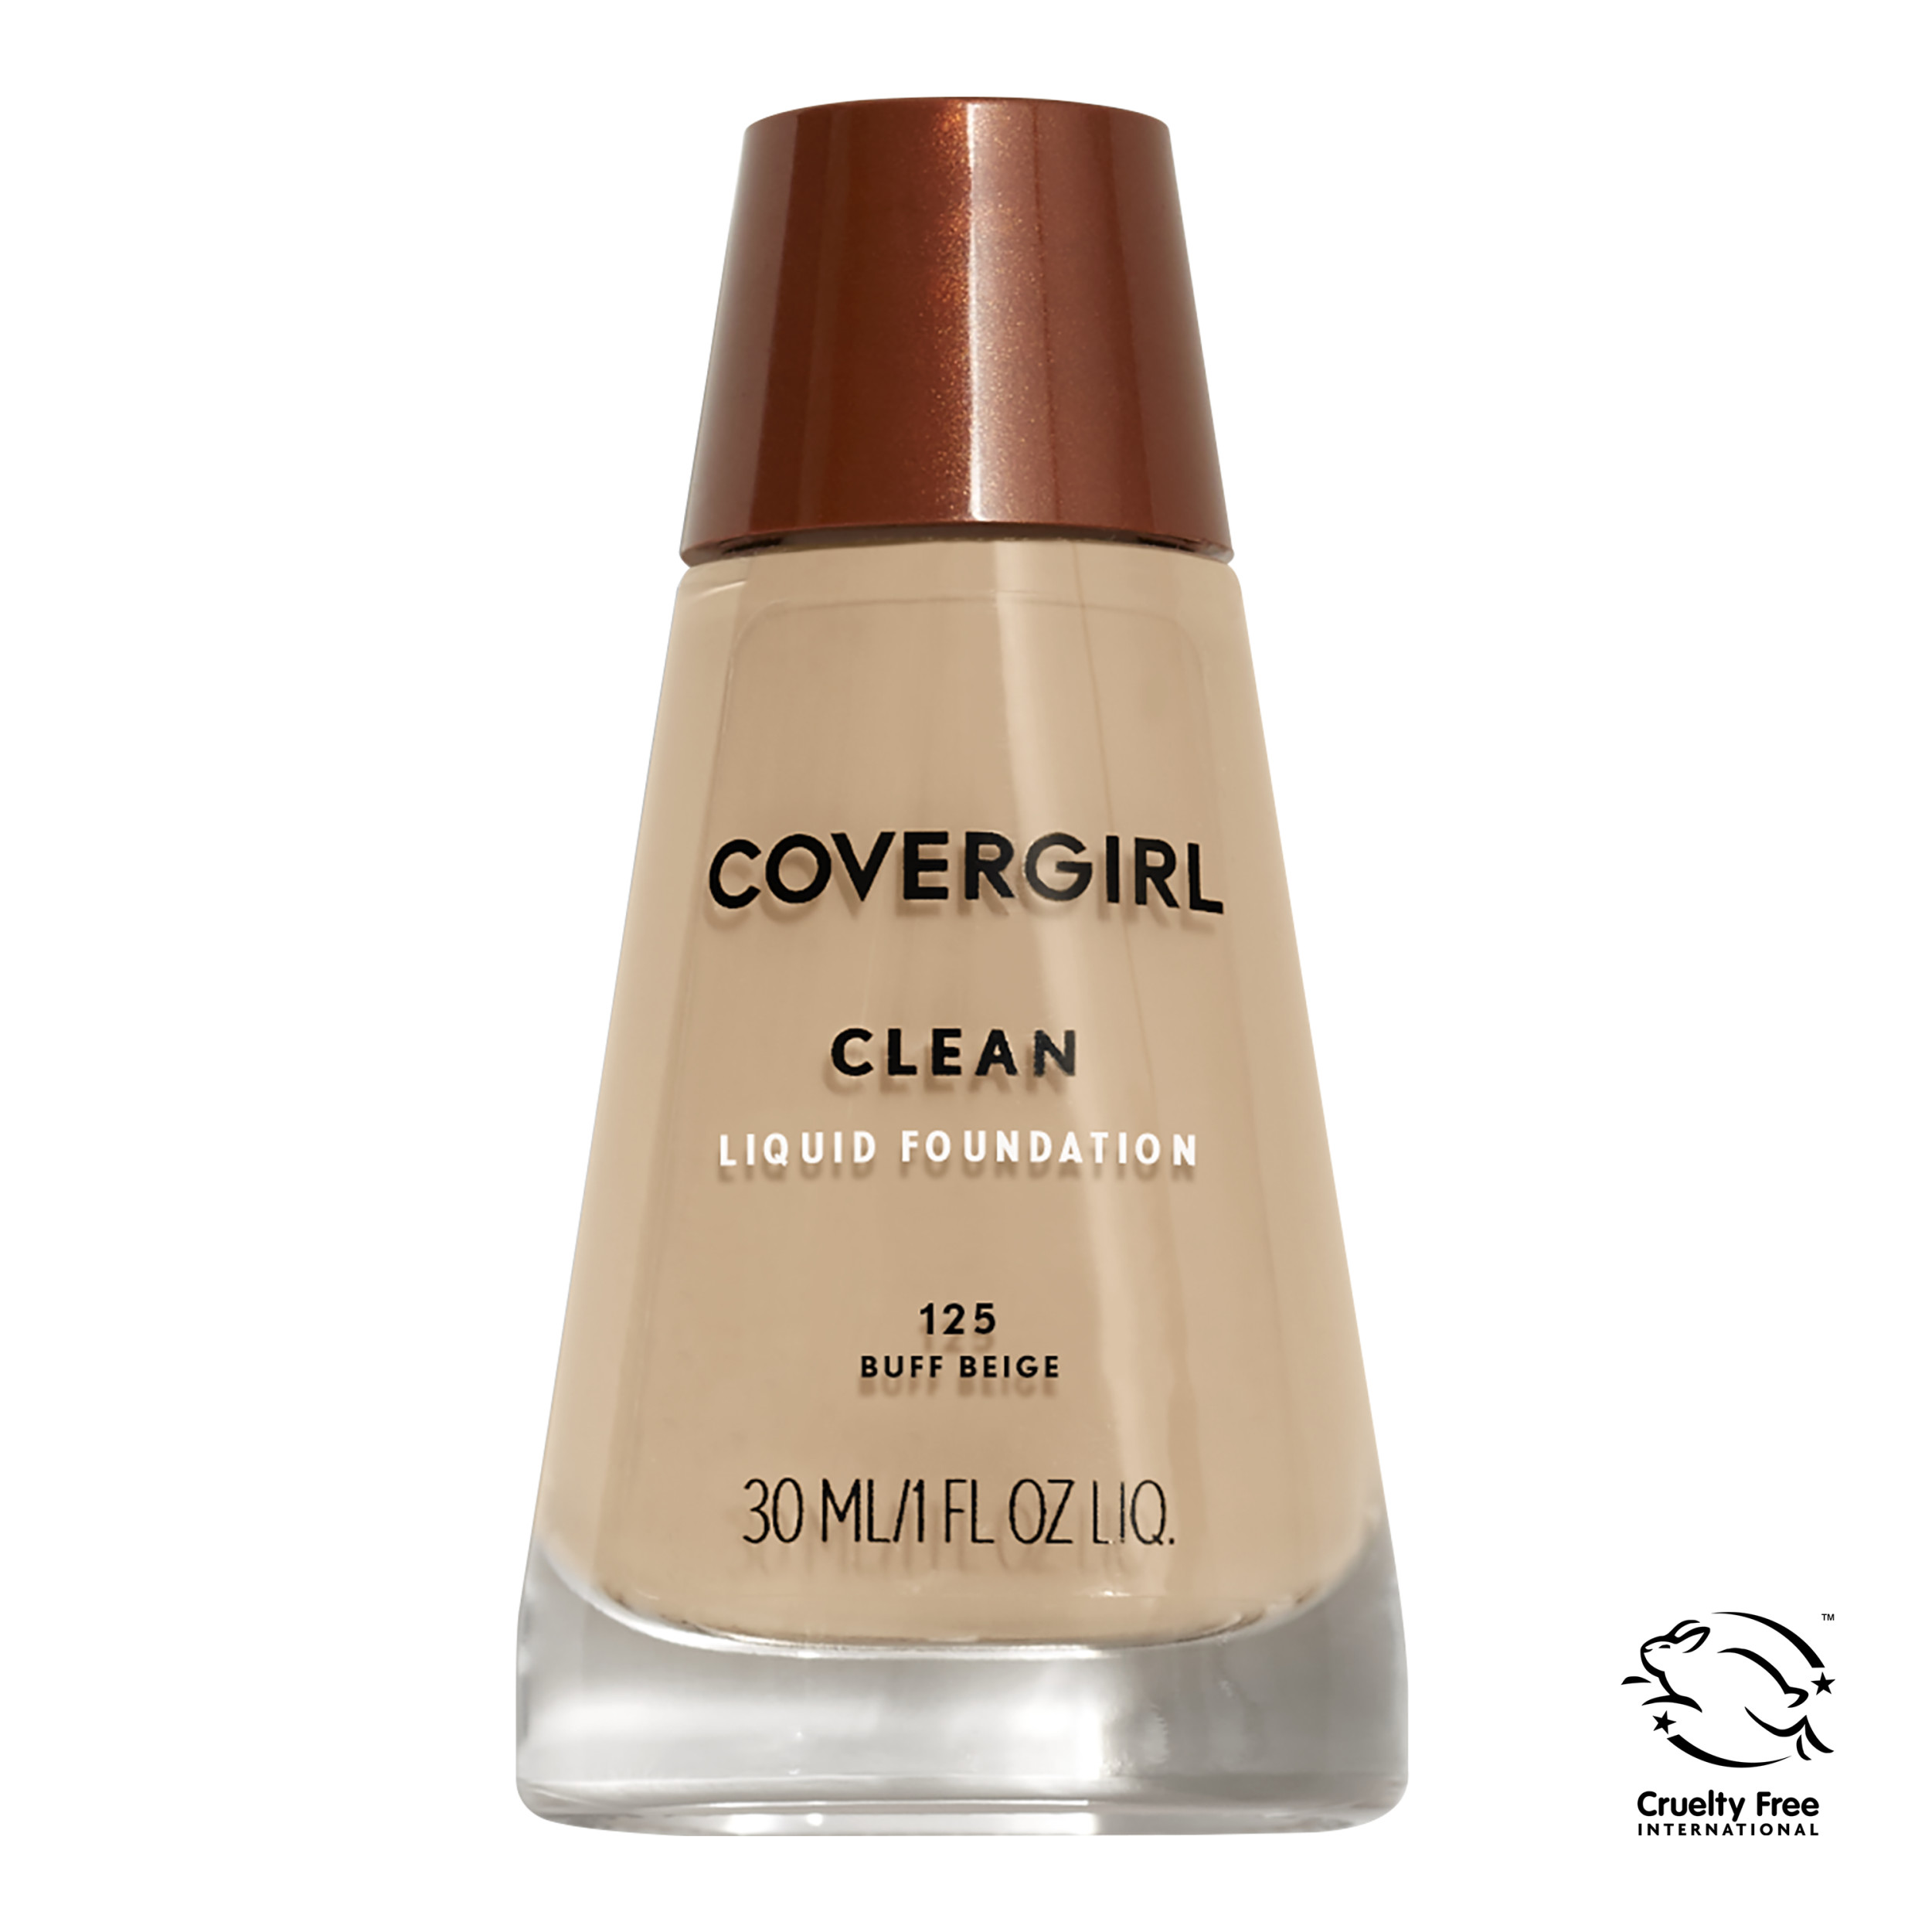 COVERGIRL Clean Liquid Foundation, 125 Buff Beige, 1 fl oz, Liquid Foundation, Moisturizing Foundation, Lightweight Foundation, Cruelty-Free Foundation, Unscented Foundation - image 1 of 15